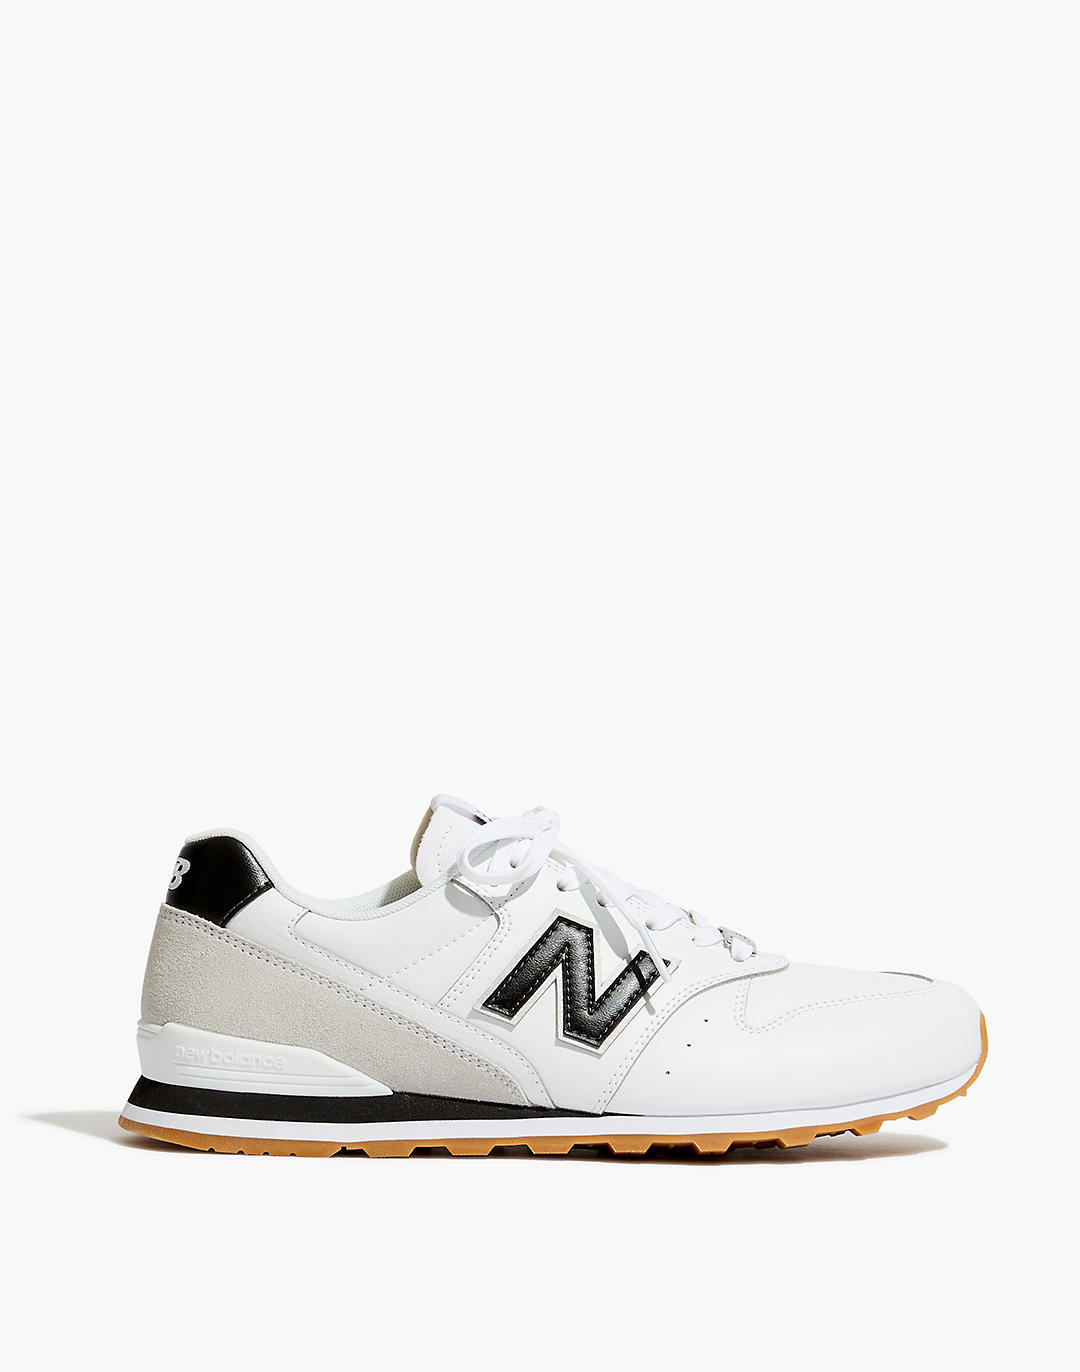 New Balance® 996 Sneakers in White and Black